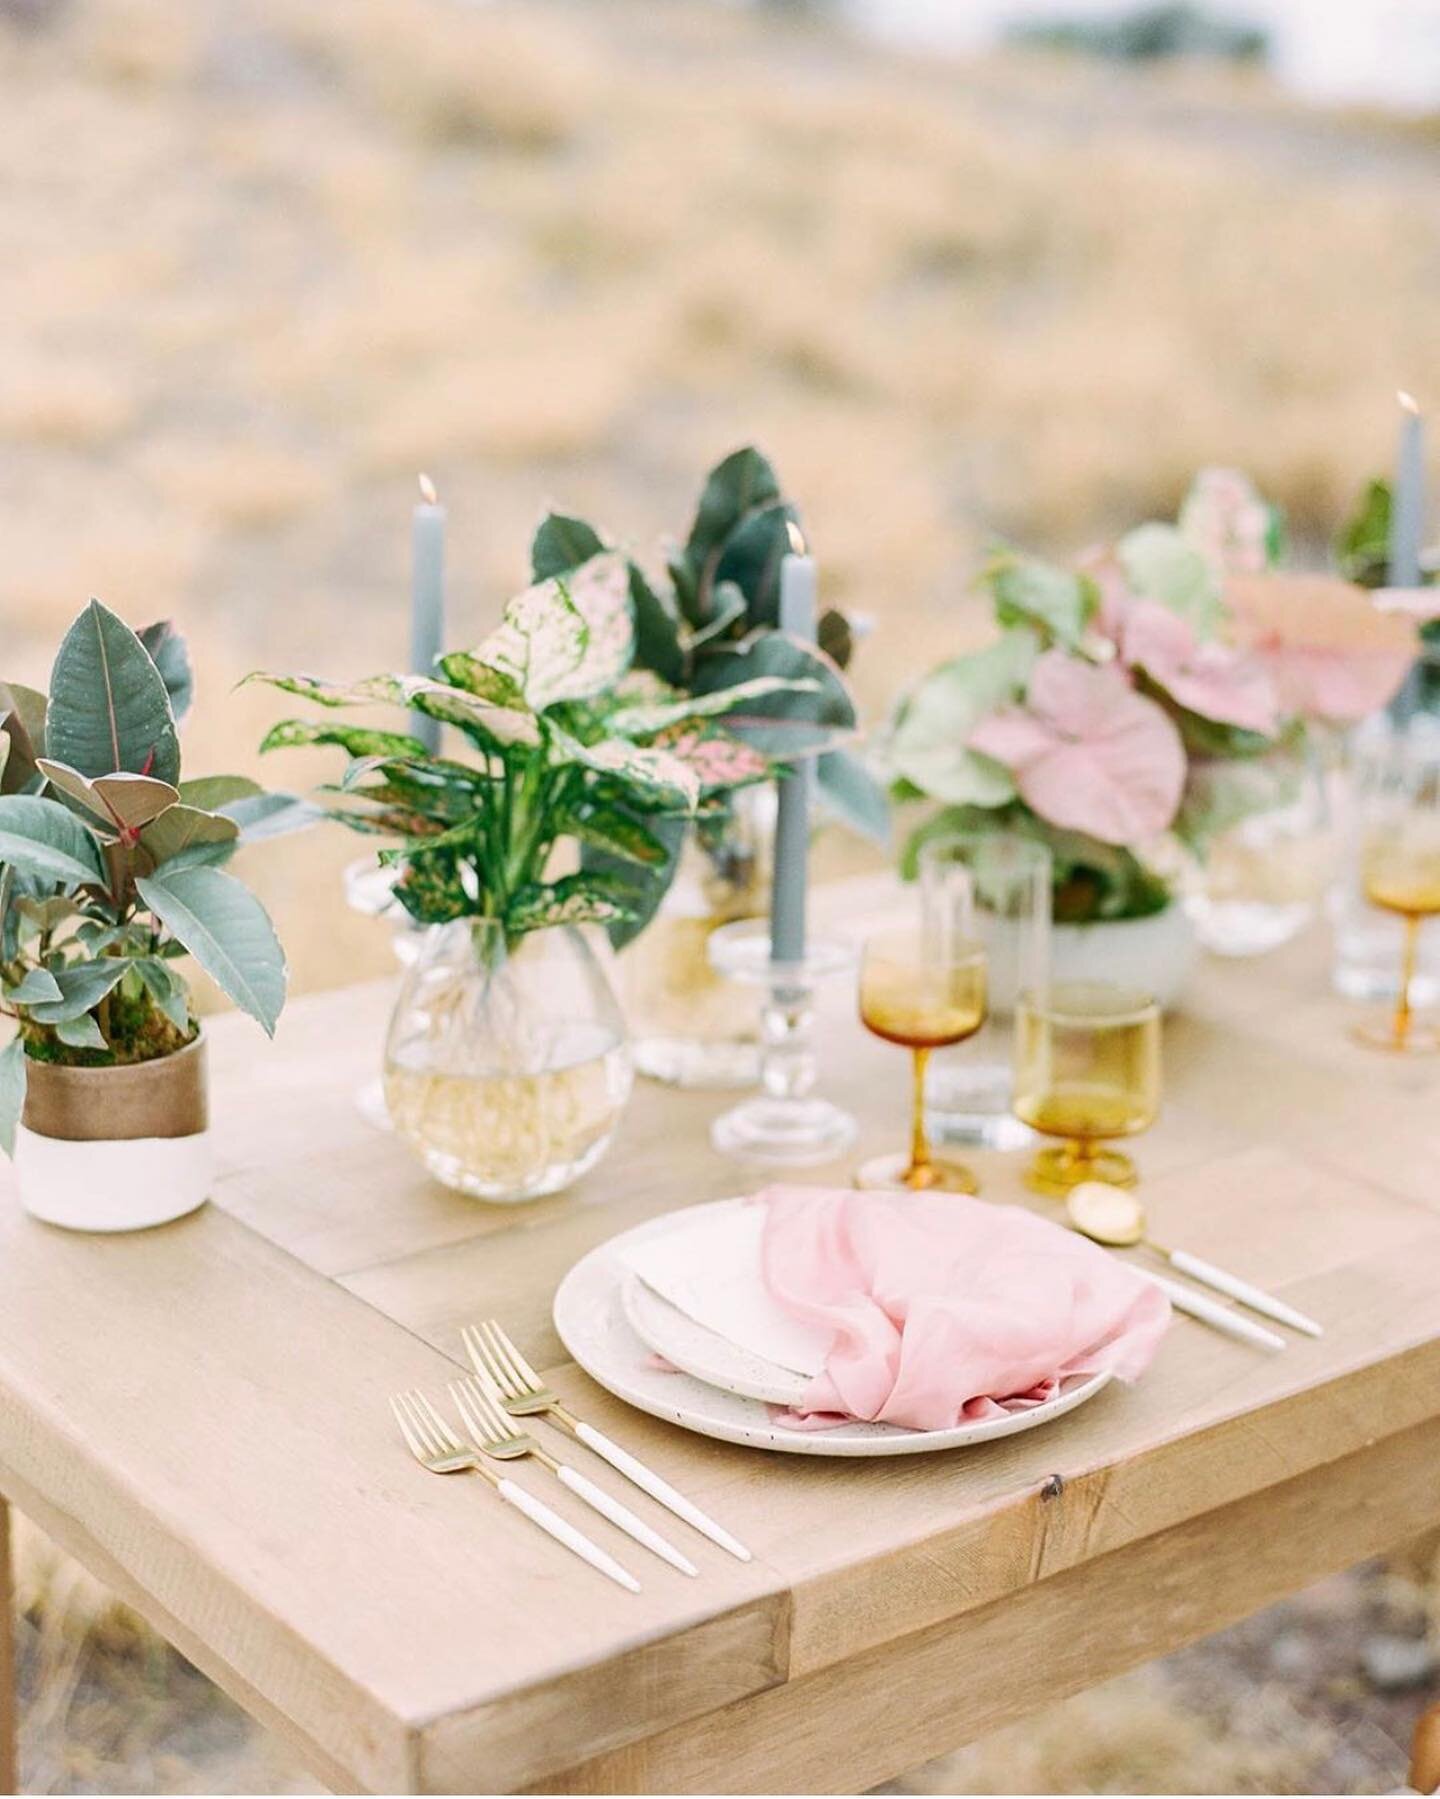 Excited to be featured today on @magnoliarouge ✨ We loved collaborating on this magical sunset shoot!! Mahalo @opihilove for including us!

PC: @brie.thomason 
Planning + Design: @opihilove 
Place Settings: @setmaui 
Floral: @bellabloommaui 
Rentals: